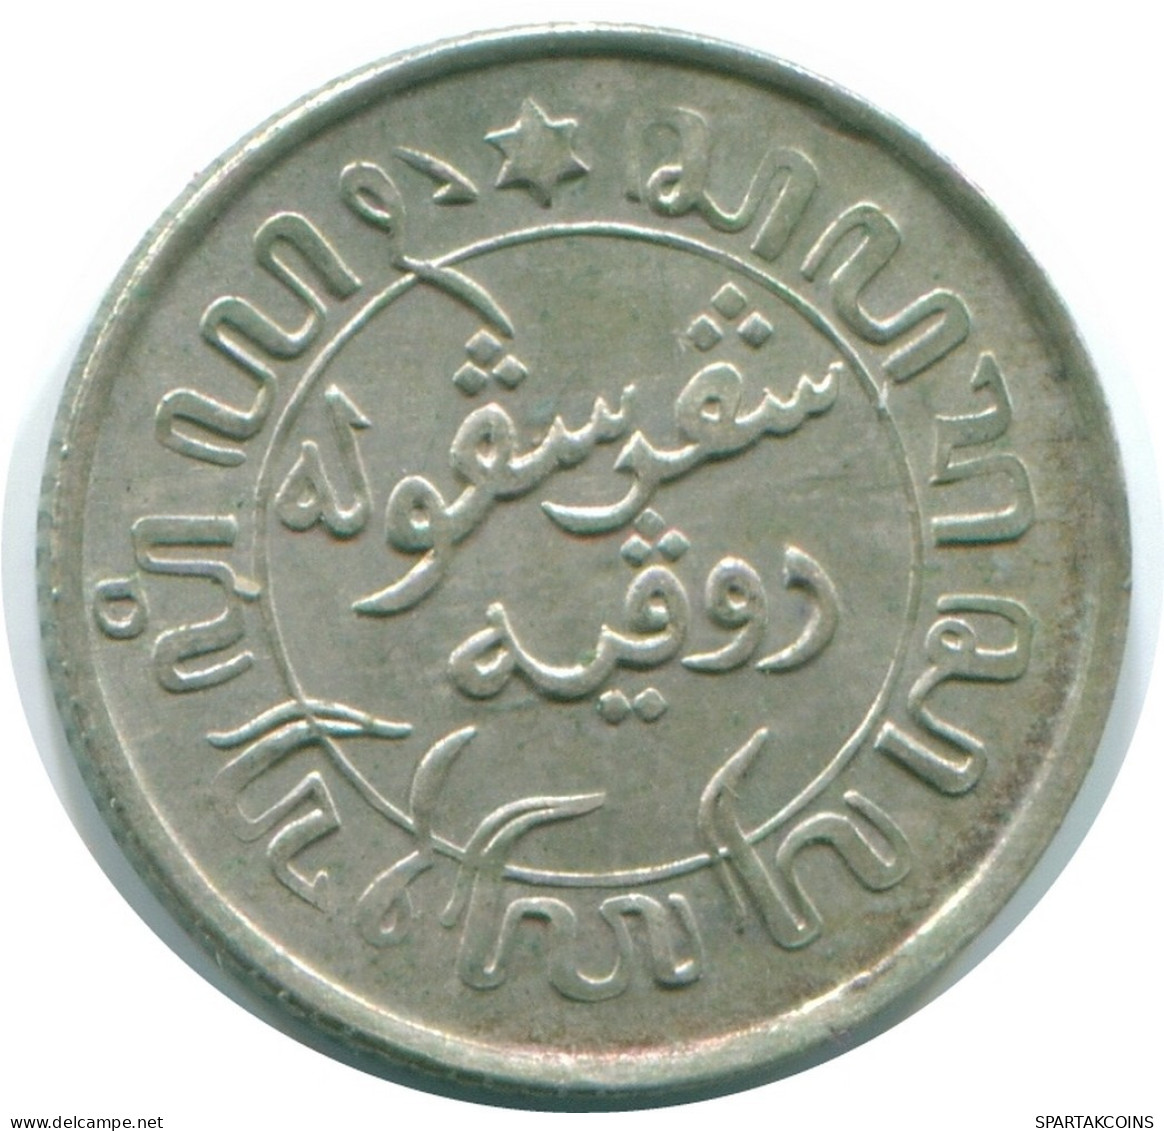 1/10 GULDEN 1941 S NETHERLANDS EAST INDIES SILVER Colonial Coin #NL13794.3.U.A - Dutch East Indies